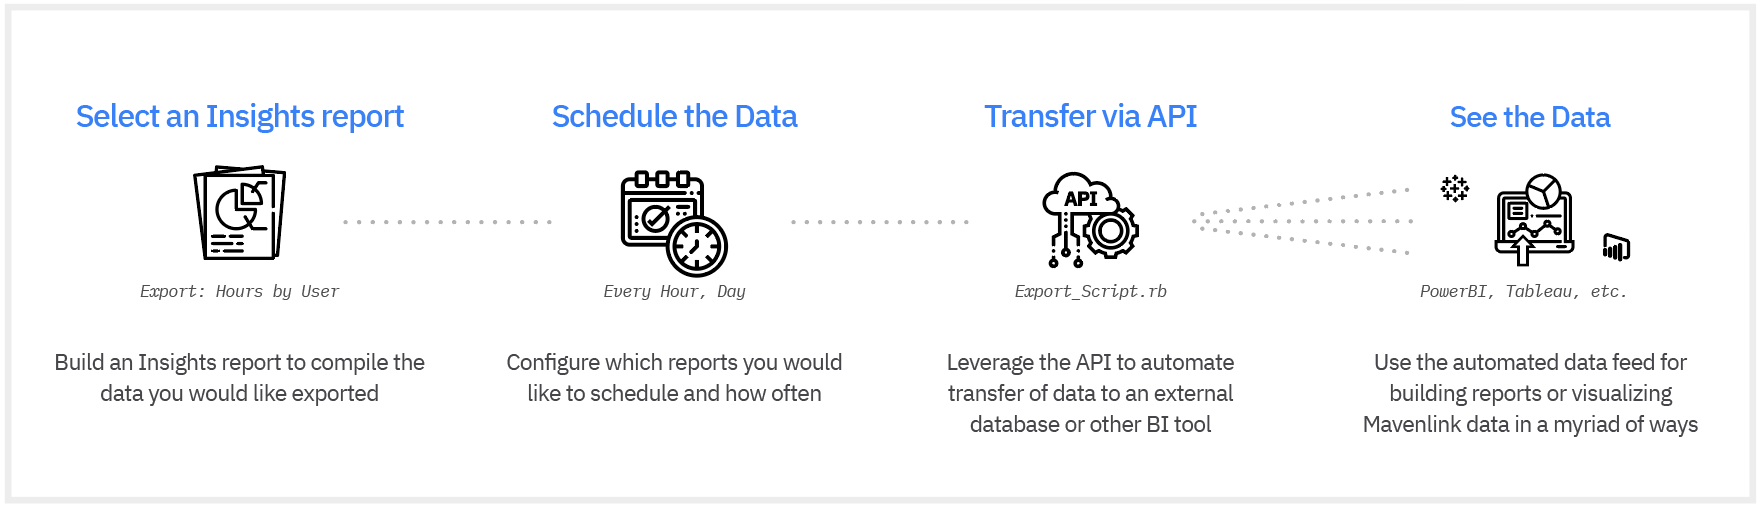 insights-scheduled-data-exporter-diagram.png